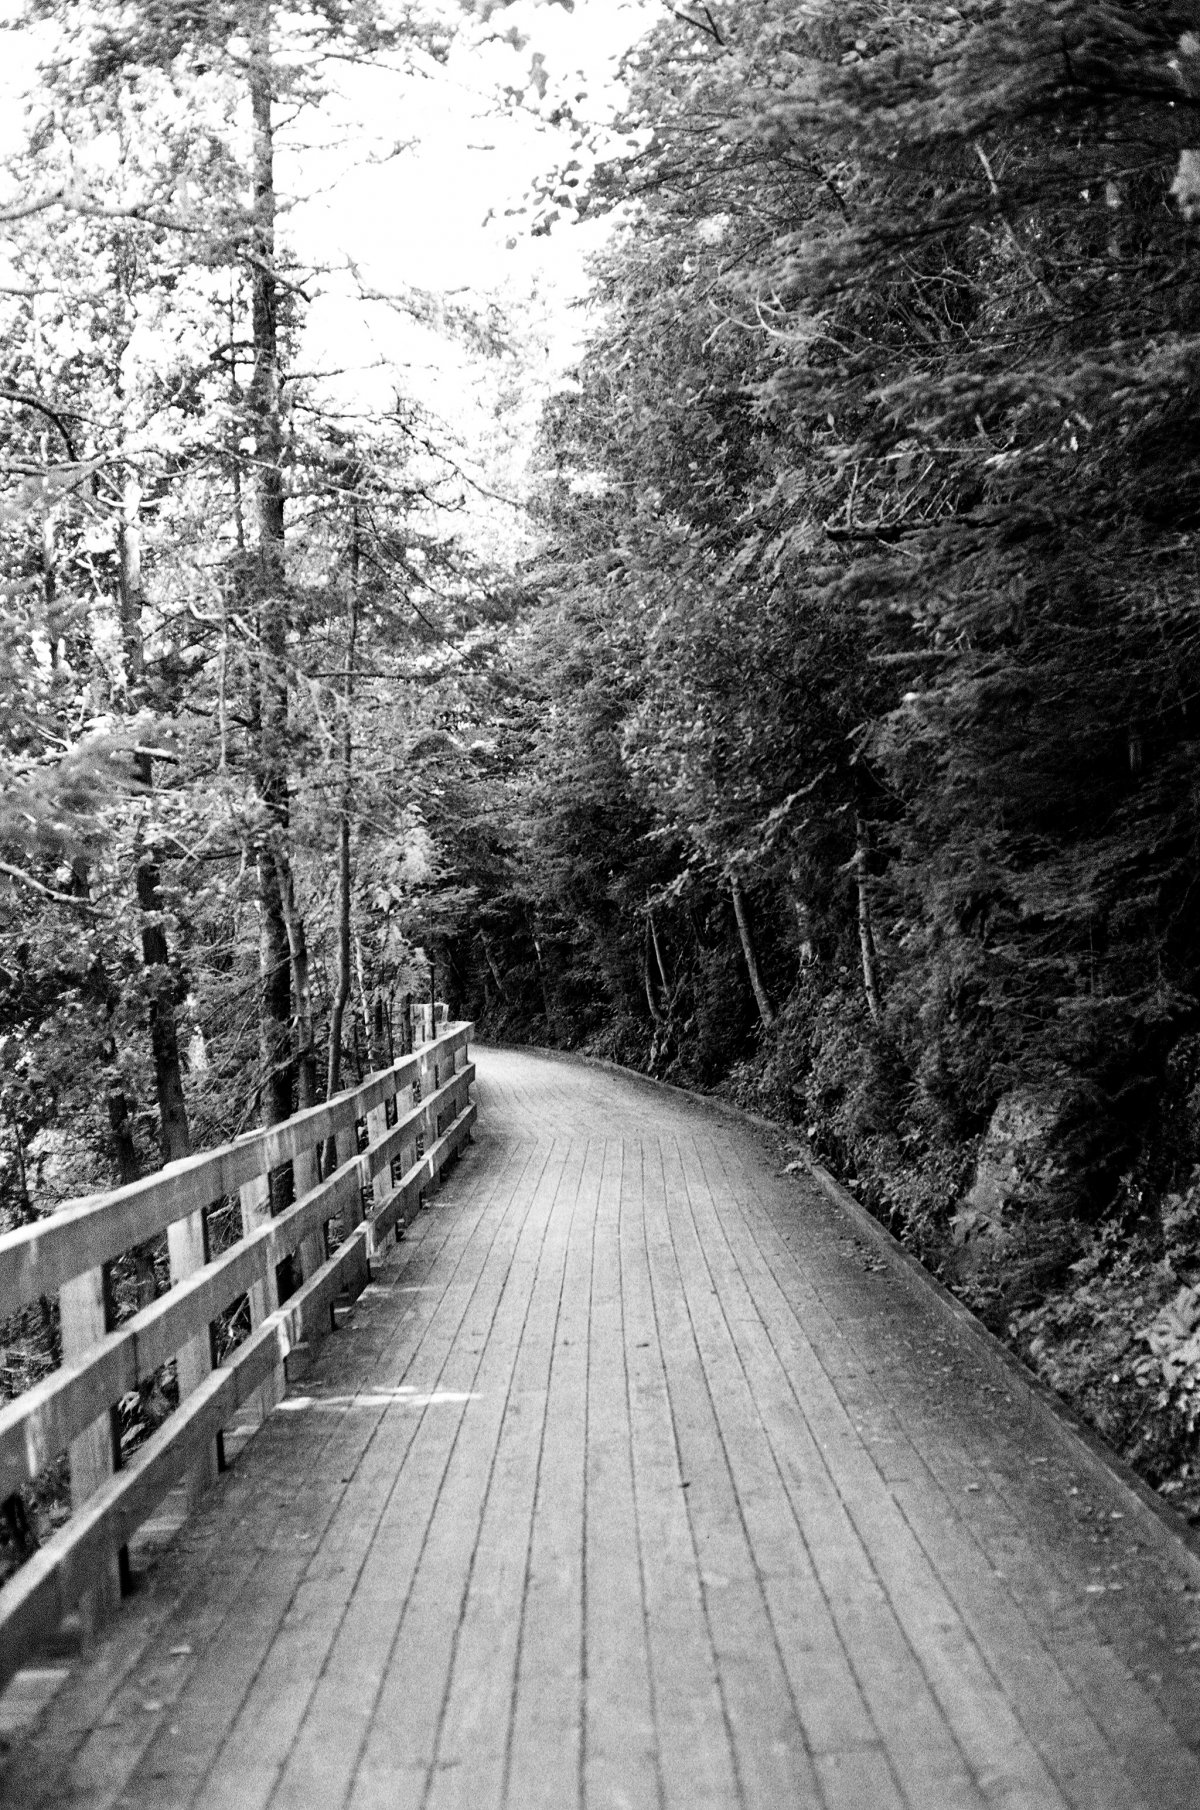 Black and white wooden plank road pictures